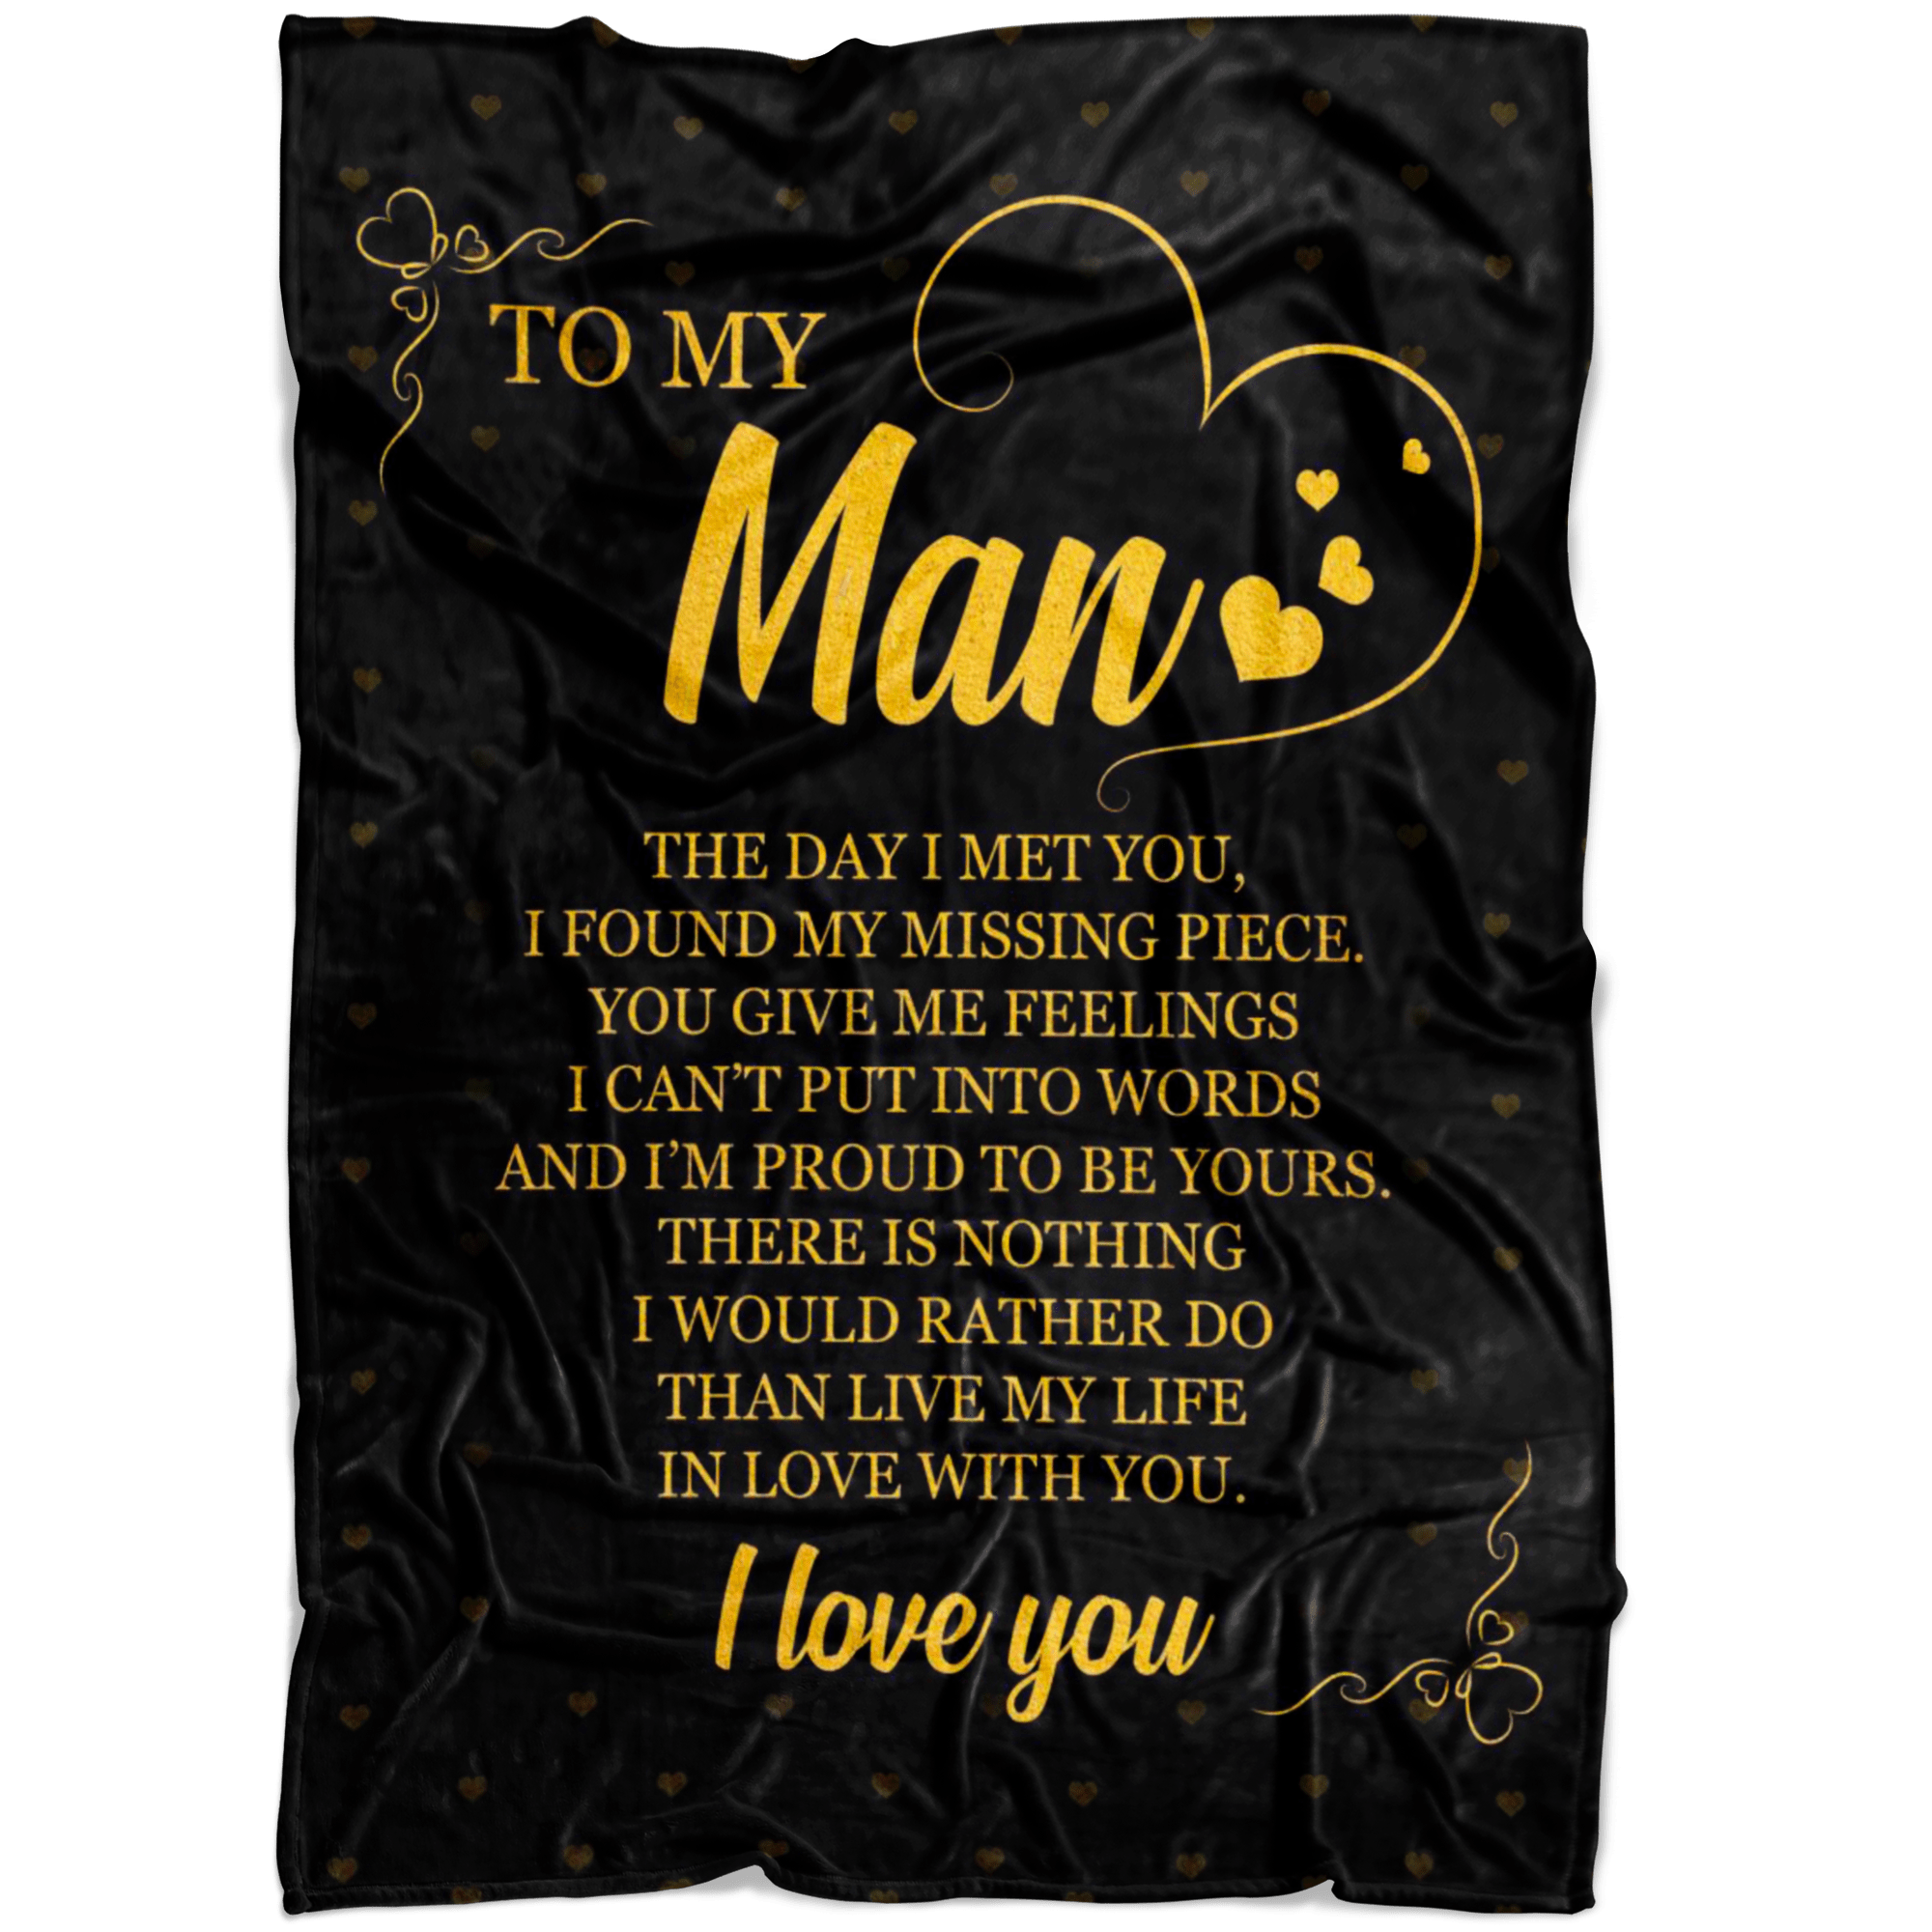 To My Man I Love You Blanket Gift For Husband Boyfriend Birthday Gift Home Decor Bedding Couch Sofa Soft and Comfy Cozy